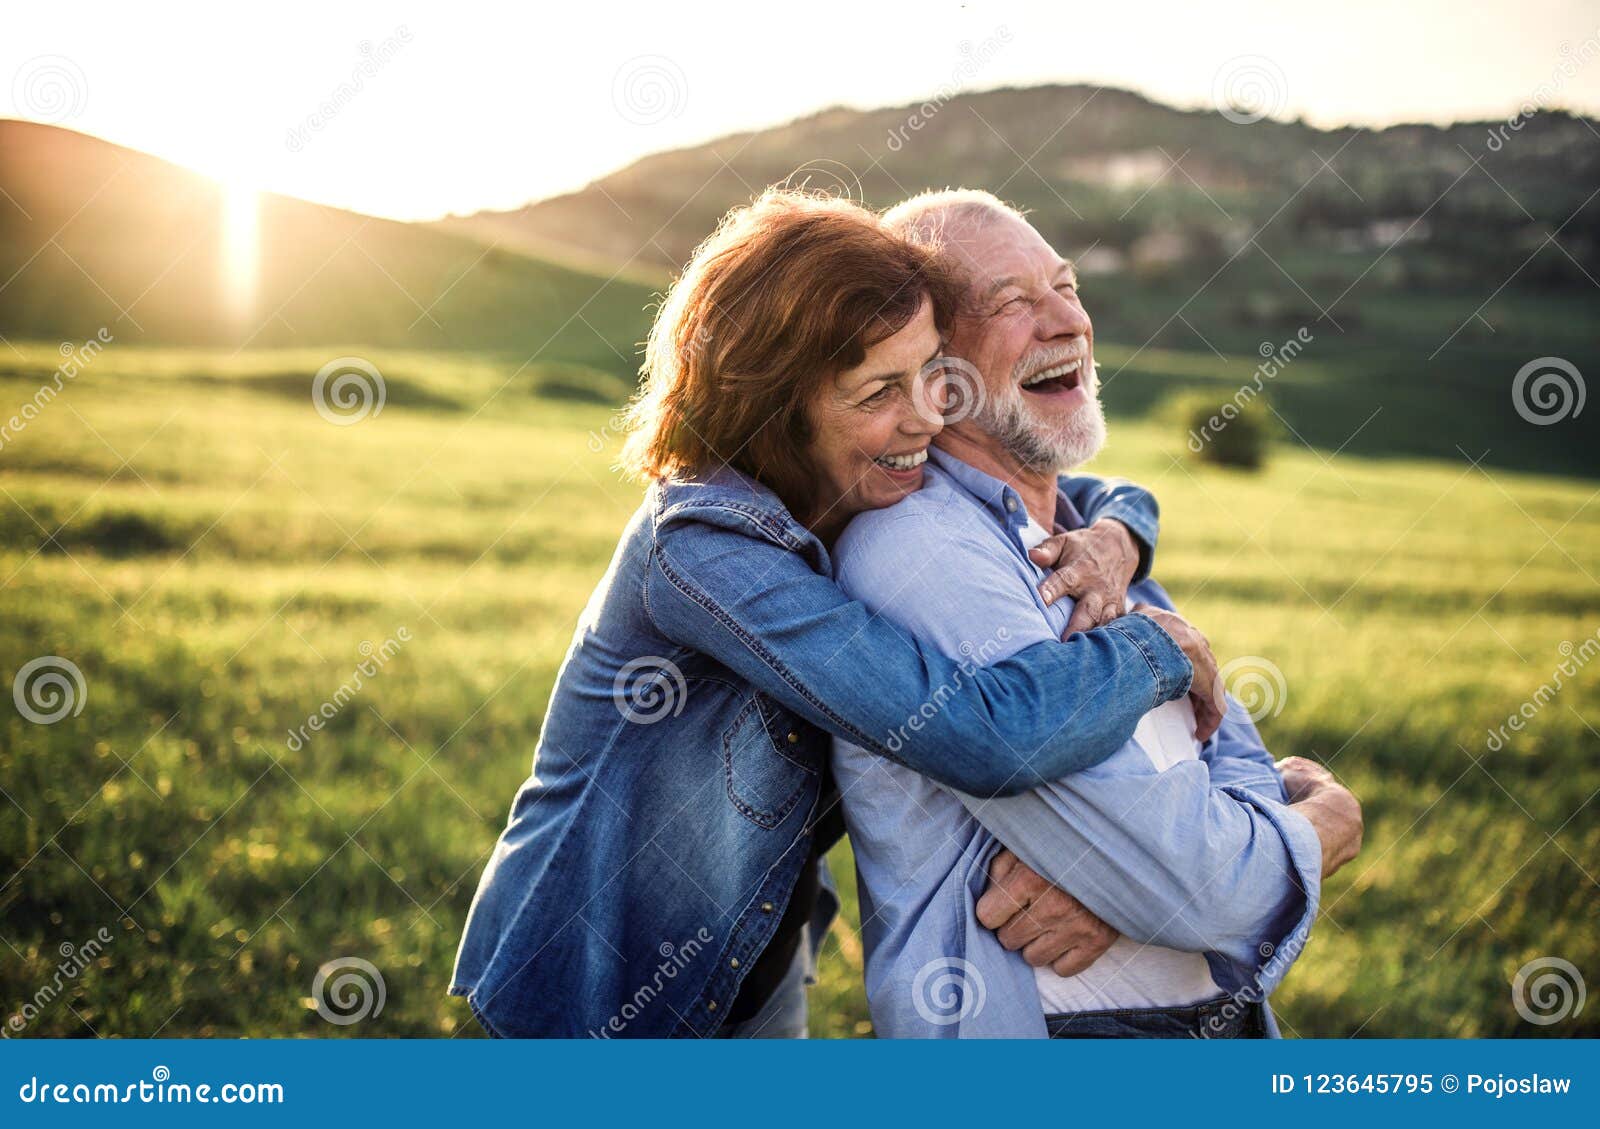 side view of senior couple hugging outside in spring nature at sunset.